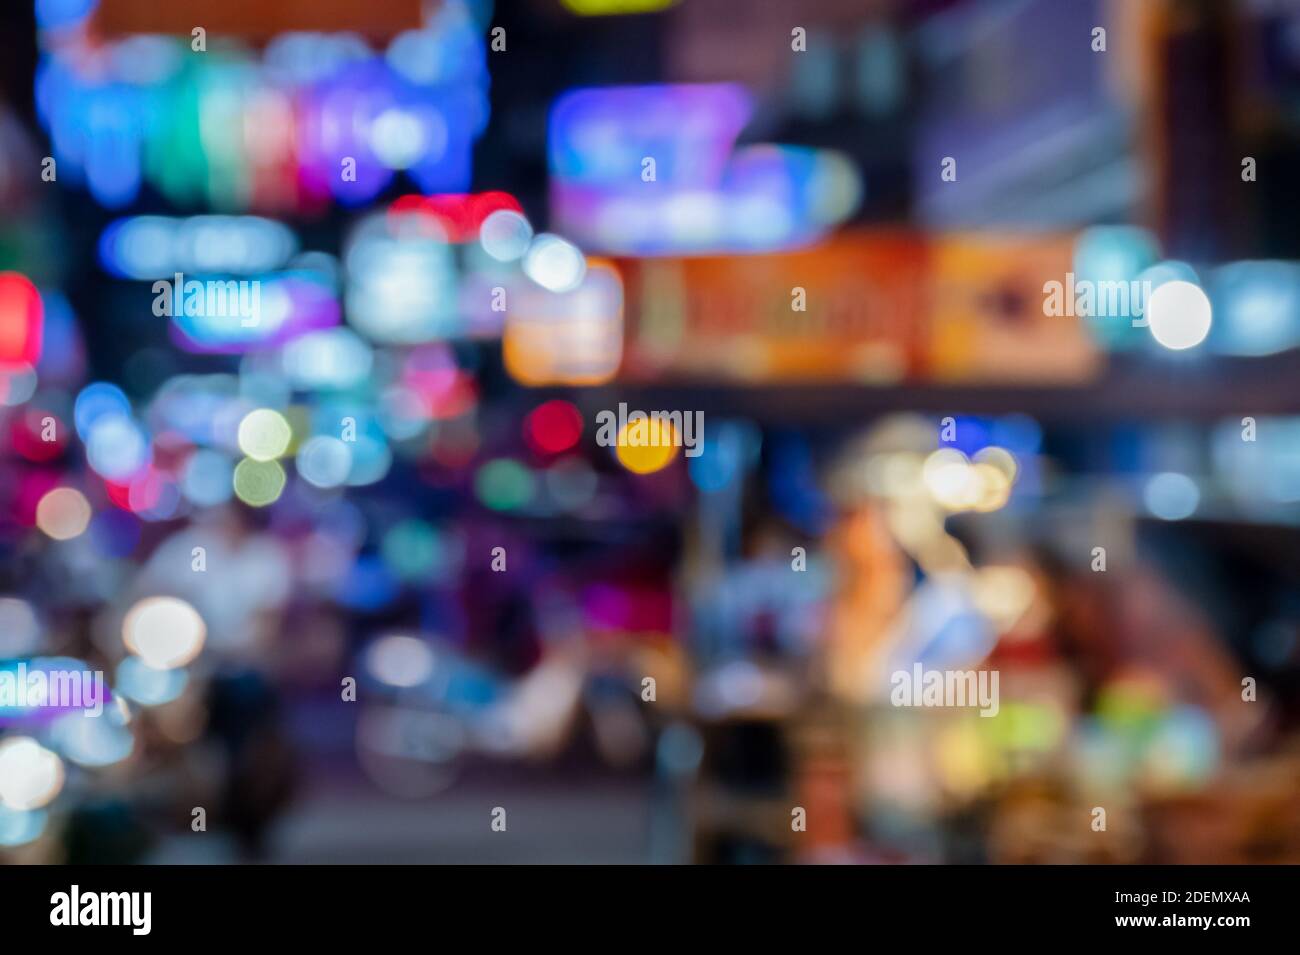 Blurred Image Of Illuminated City At Night background for present content advertising product or text backdrop design Stock Photo